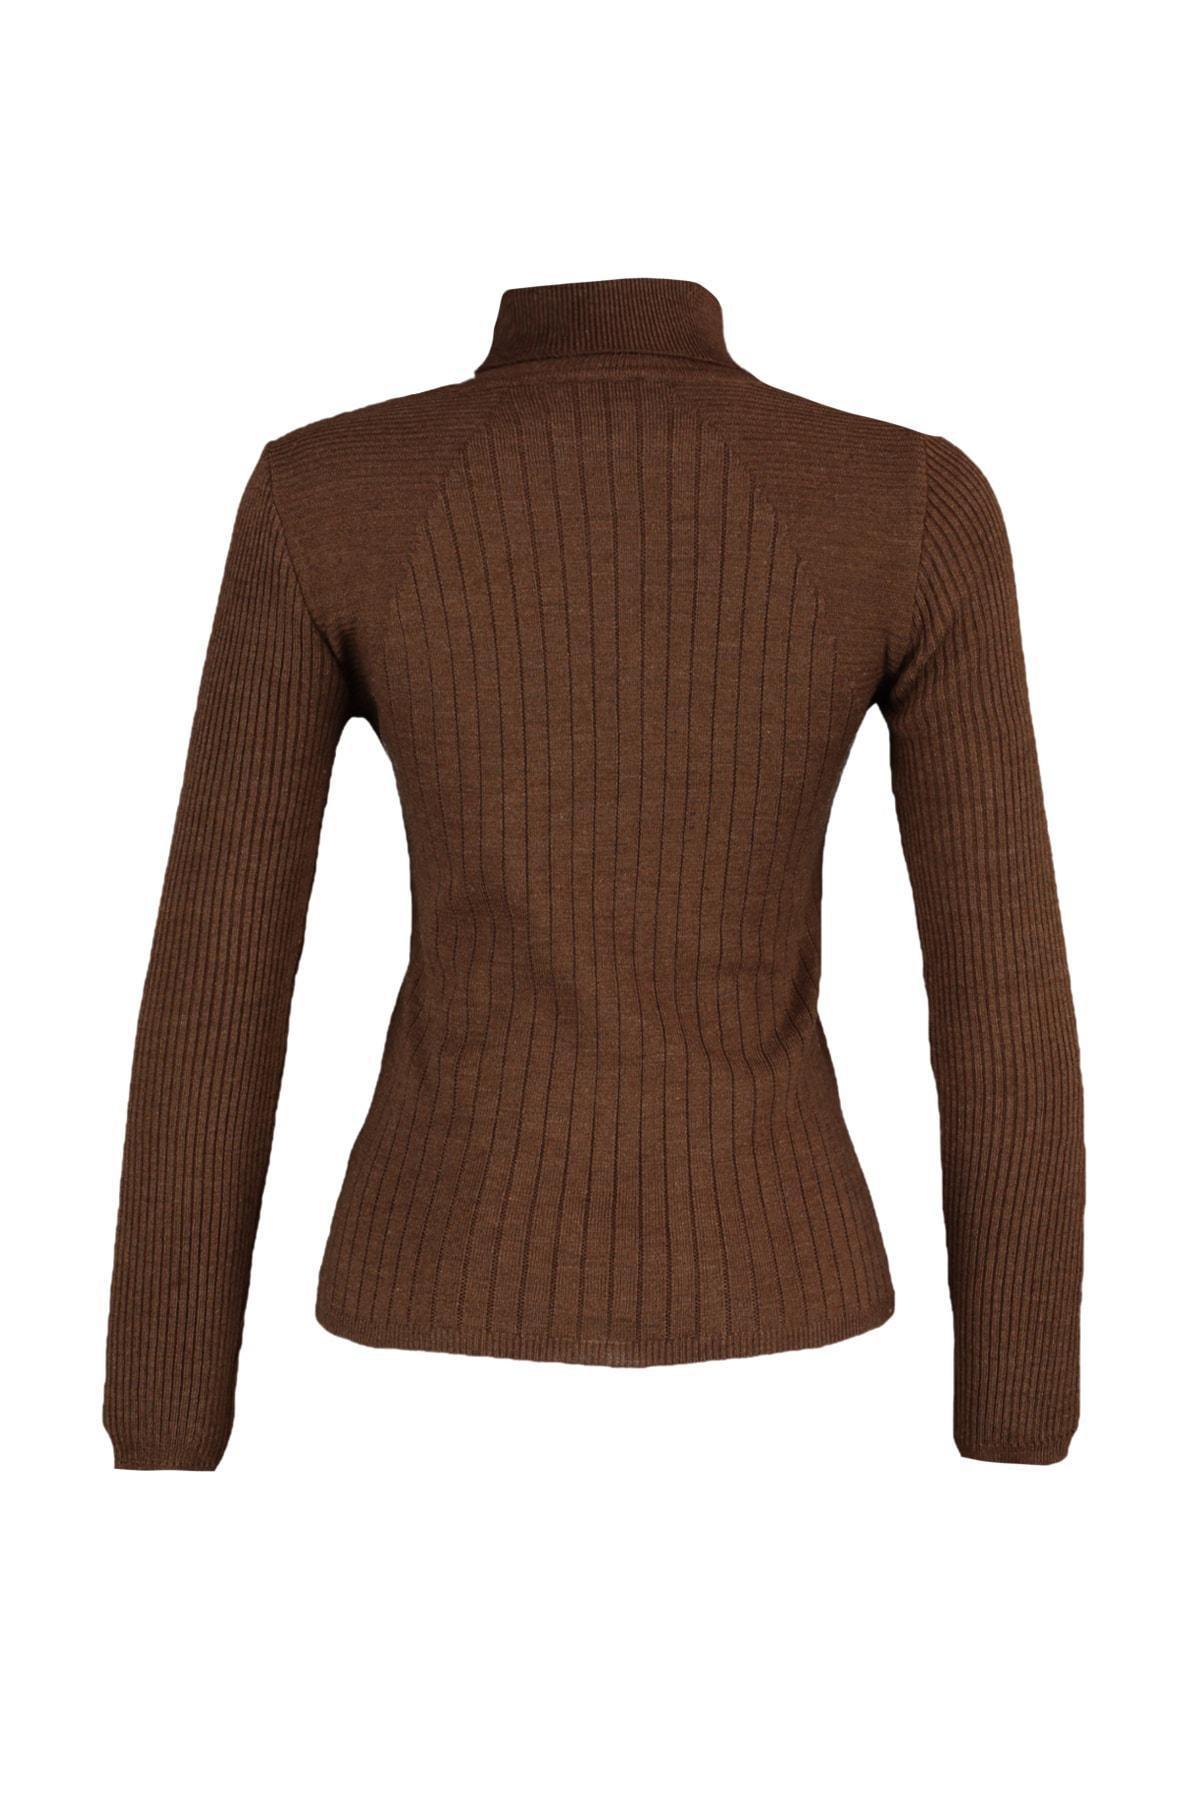 Trendyol - Brown Knitted Sweater